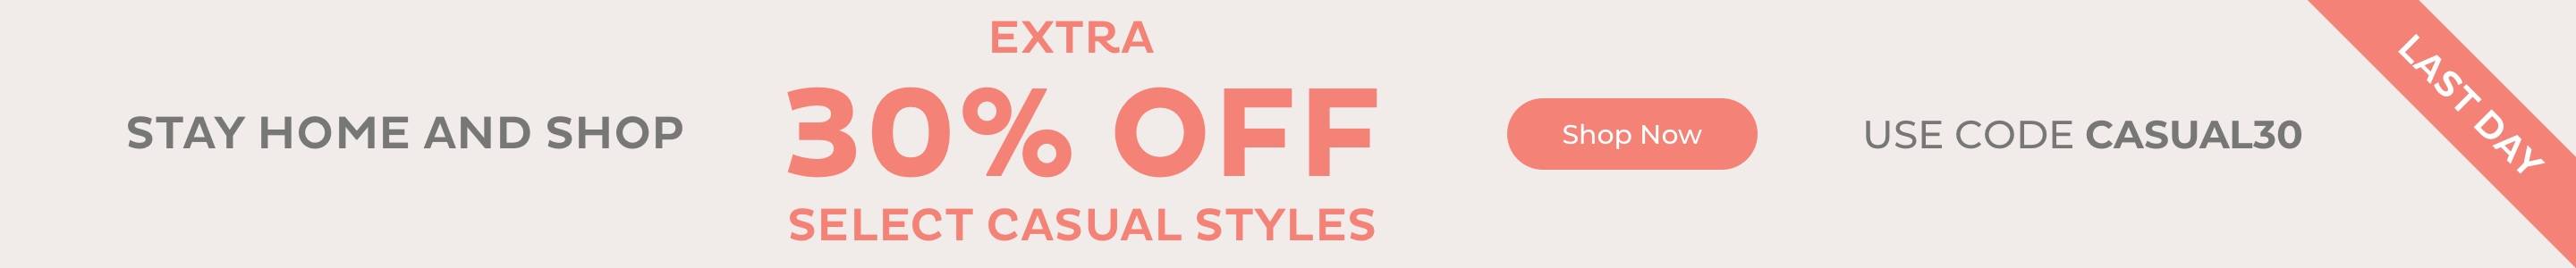 Extra 30% Off Select Casual Styles